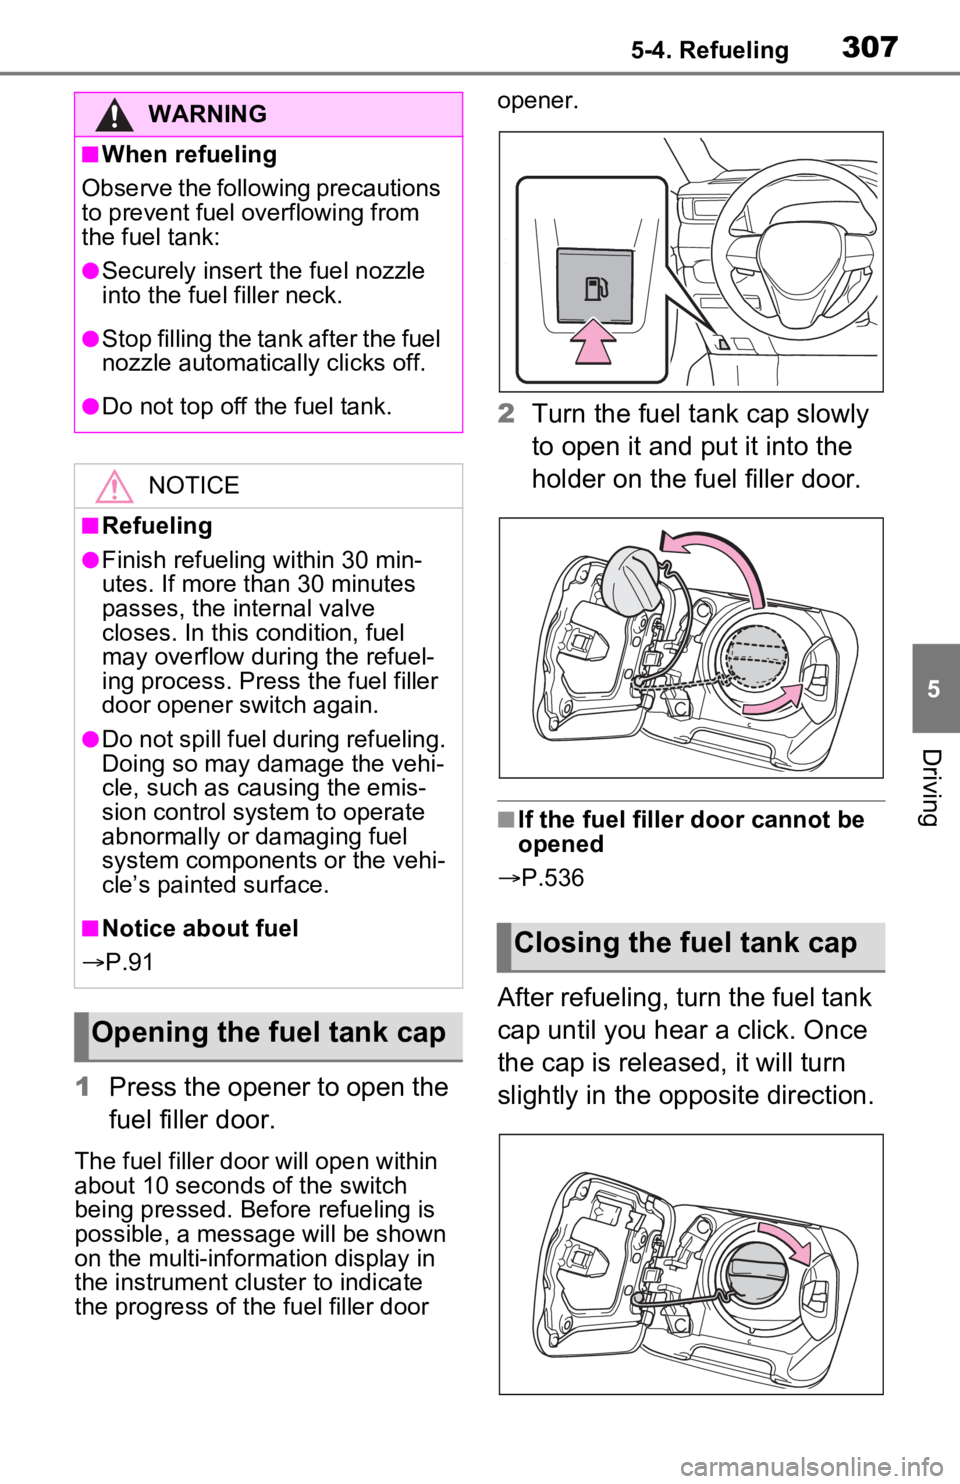 TOYOTA RAV4 PRIME 2021  Owners Manual (in English) 3075-4. Refueling
5
Driving
1Press the opener to open the 
fuel filler door.
The fuel filler doo r will open within 
about 10 seconds of the switch 
being pressed. Before refueling is 
possible, a mes